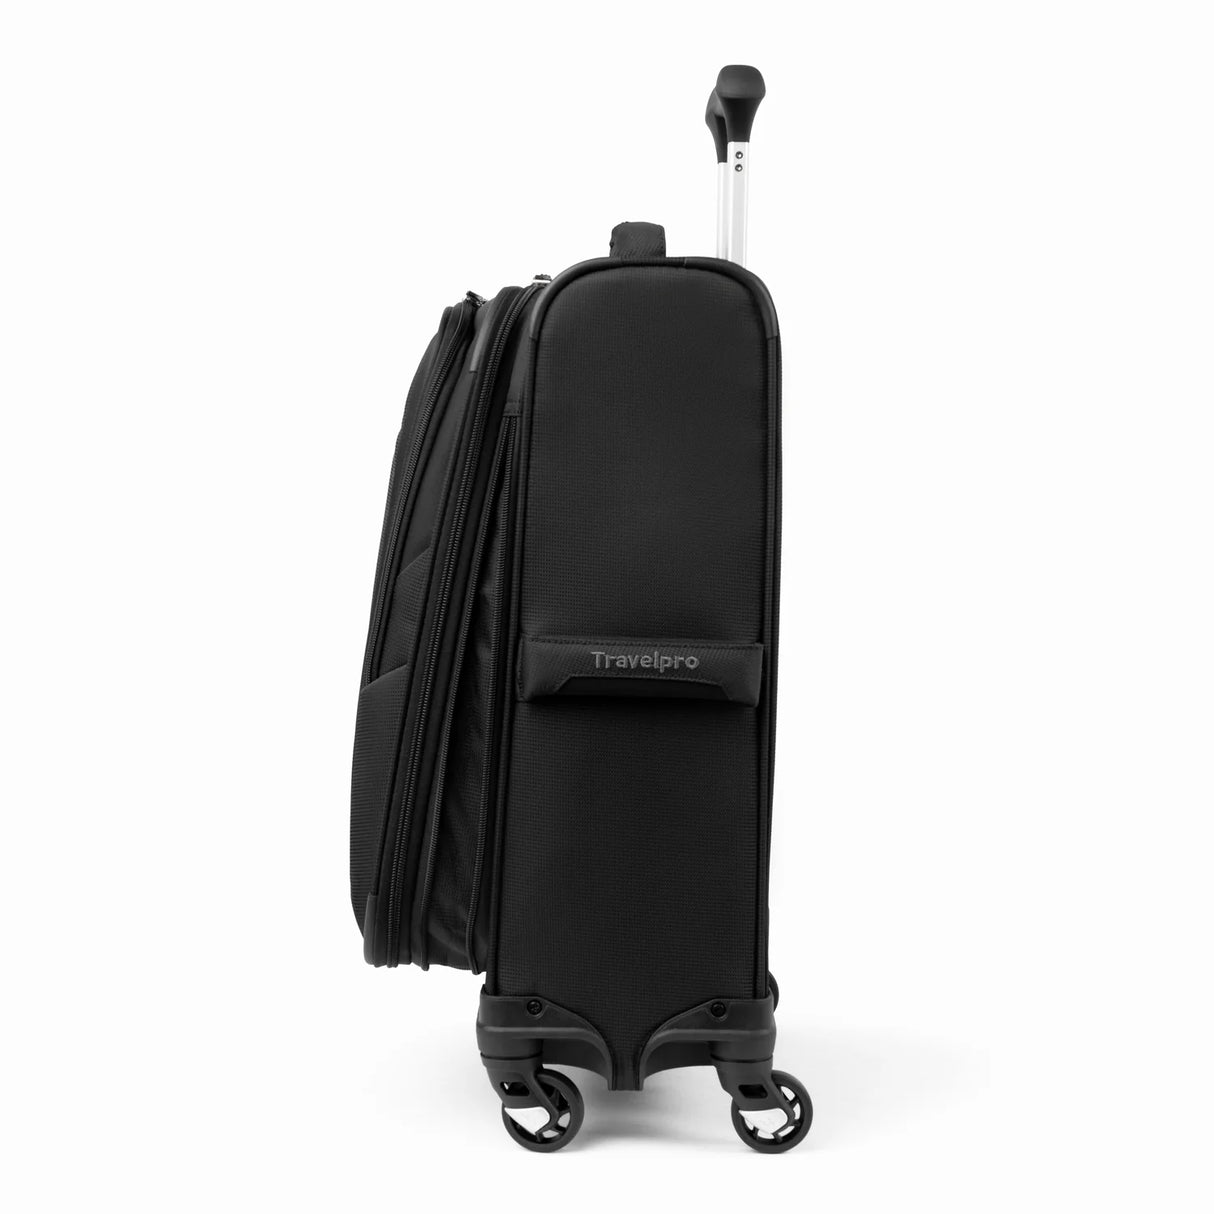 Travelpro Maxlite 5 Compact Carry-On Expandable Spinner , , 401176201_side2-1500x1500-f3a2c67_1024x1024_2x_fa4474c6-8a14-4398-8505-af127b665a59